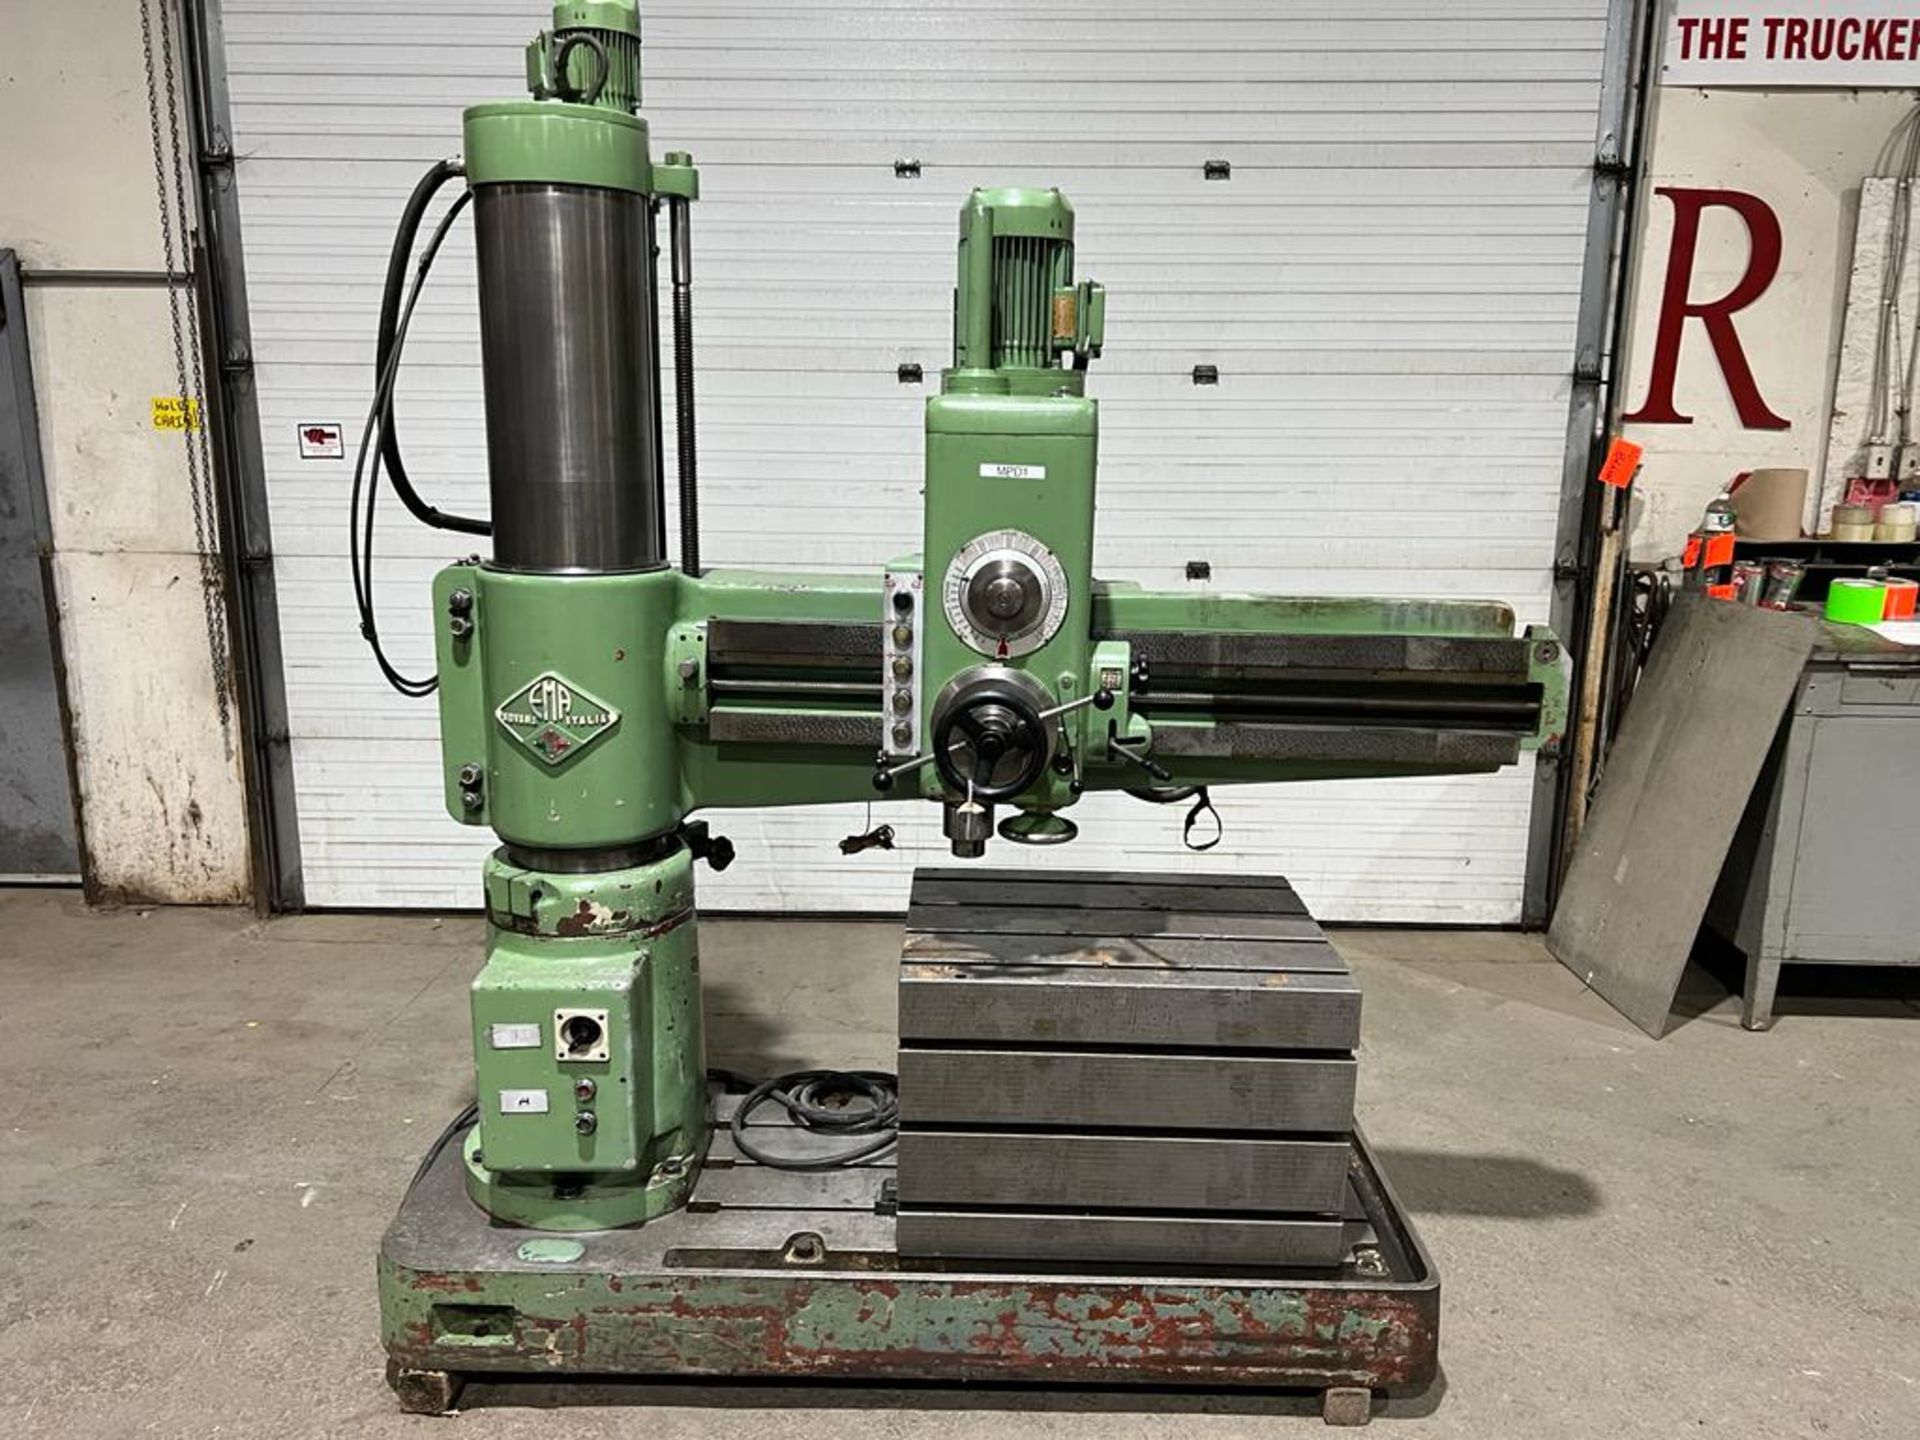 EMA Radial Arm Drill - 4' Unit MADE IN ITALY with table - 3 phase